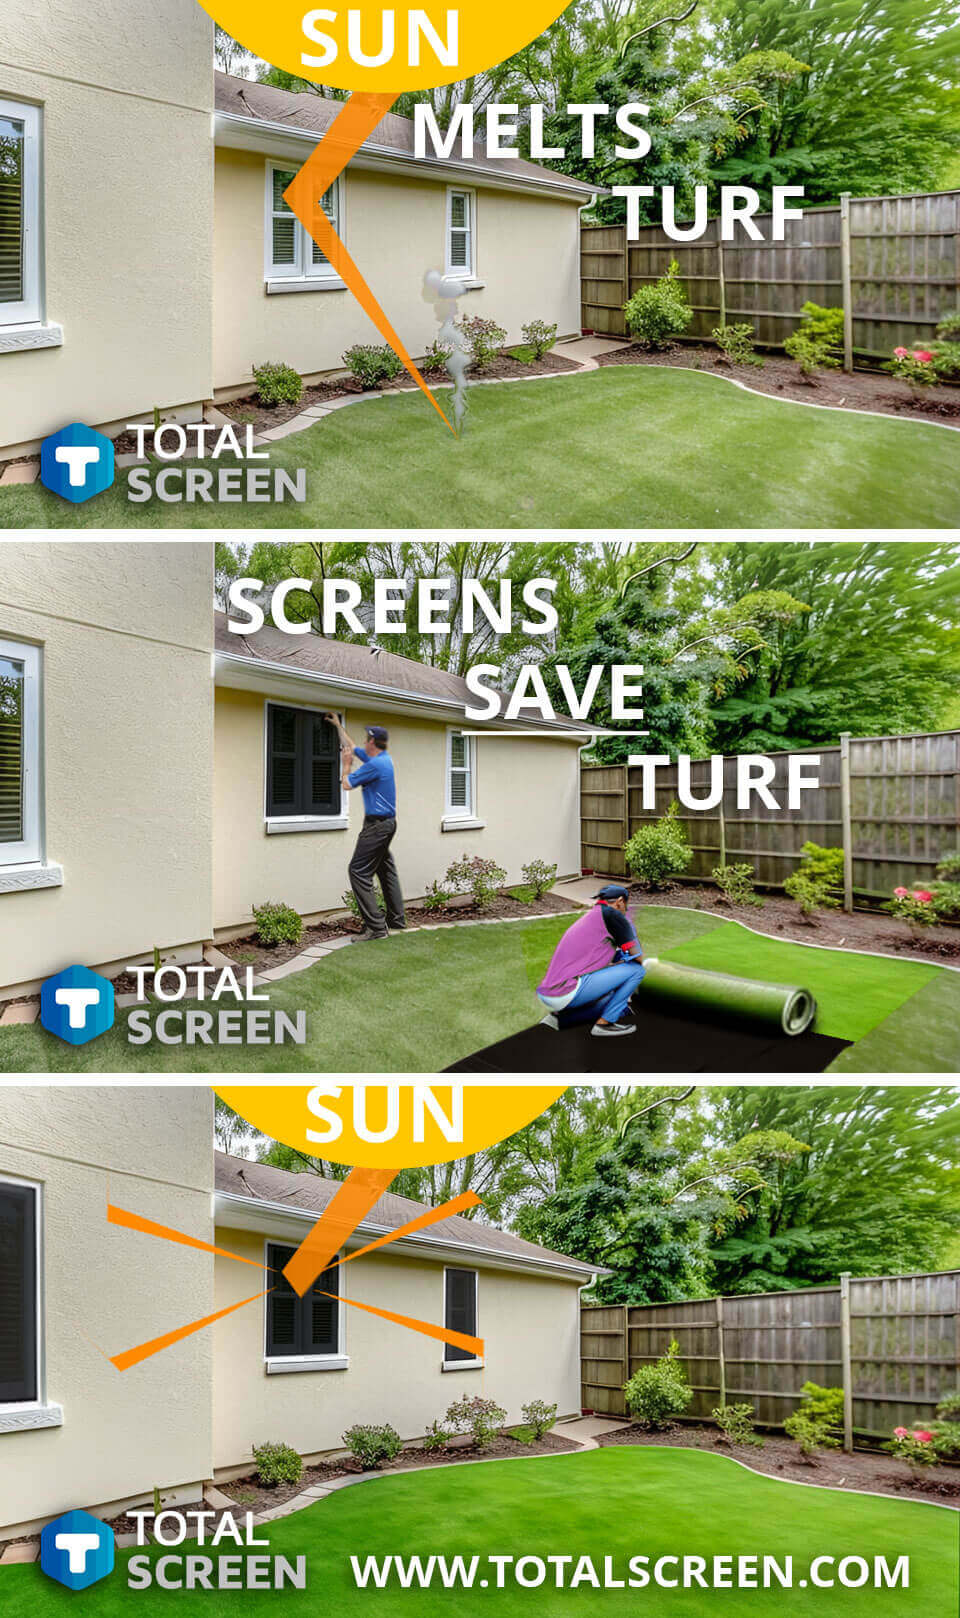 Turf Melt Problems are caused by window reflection from low-e windows